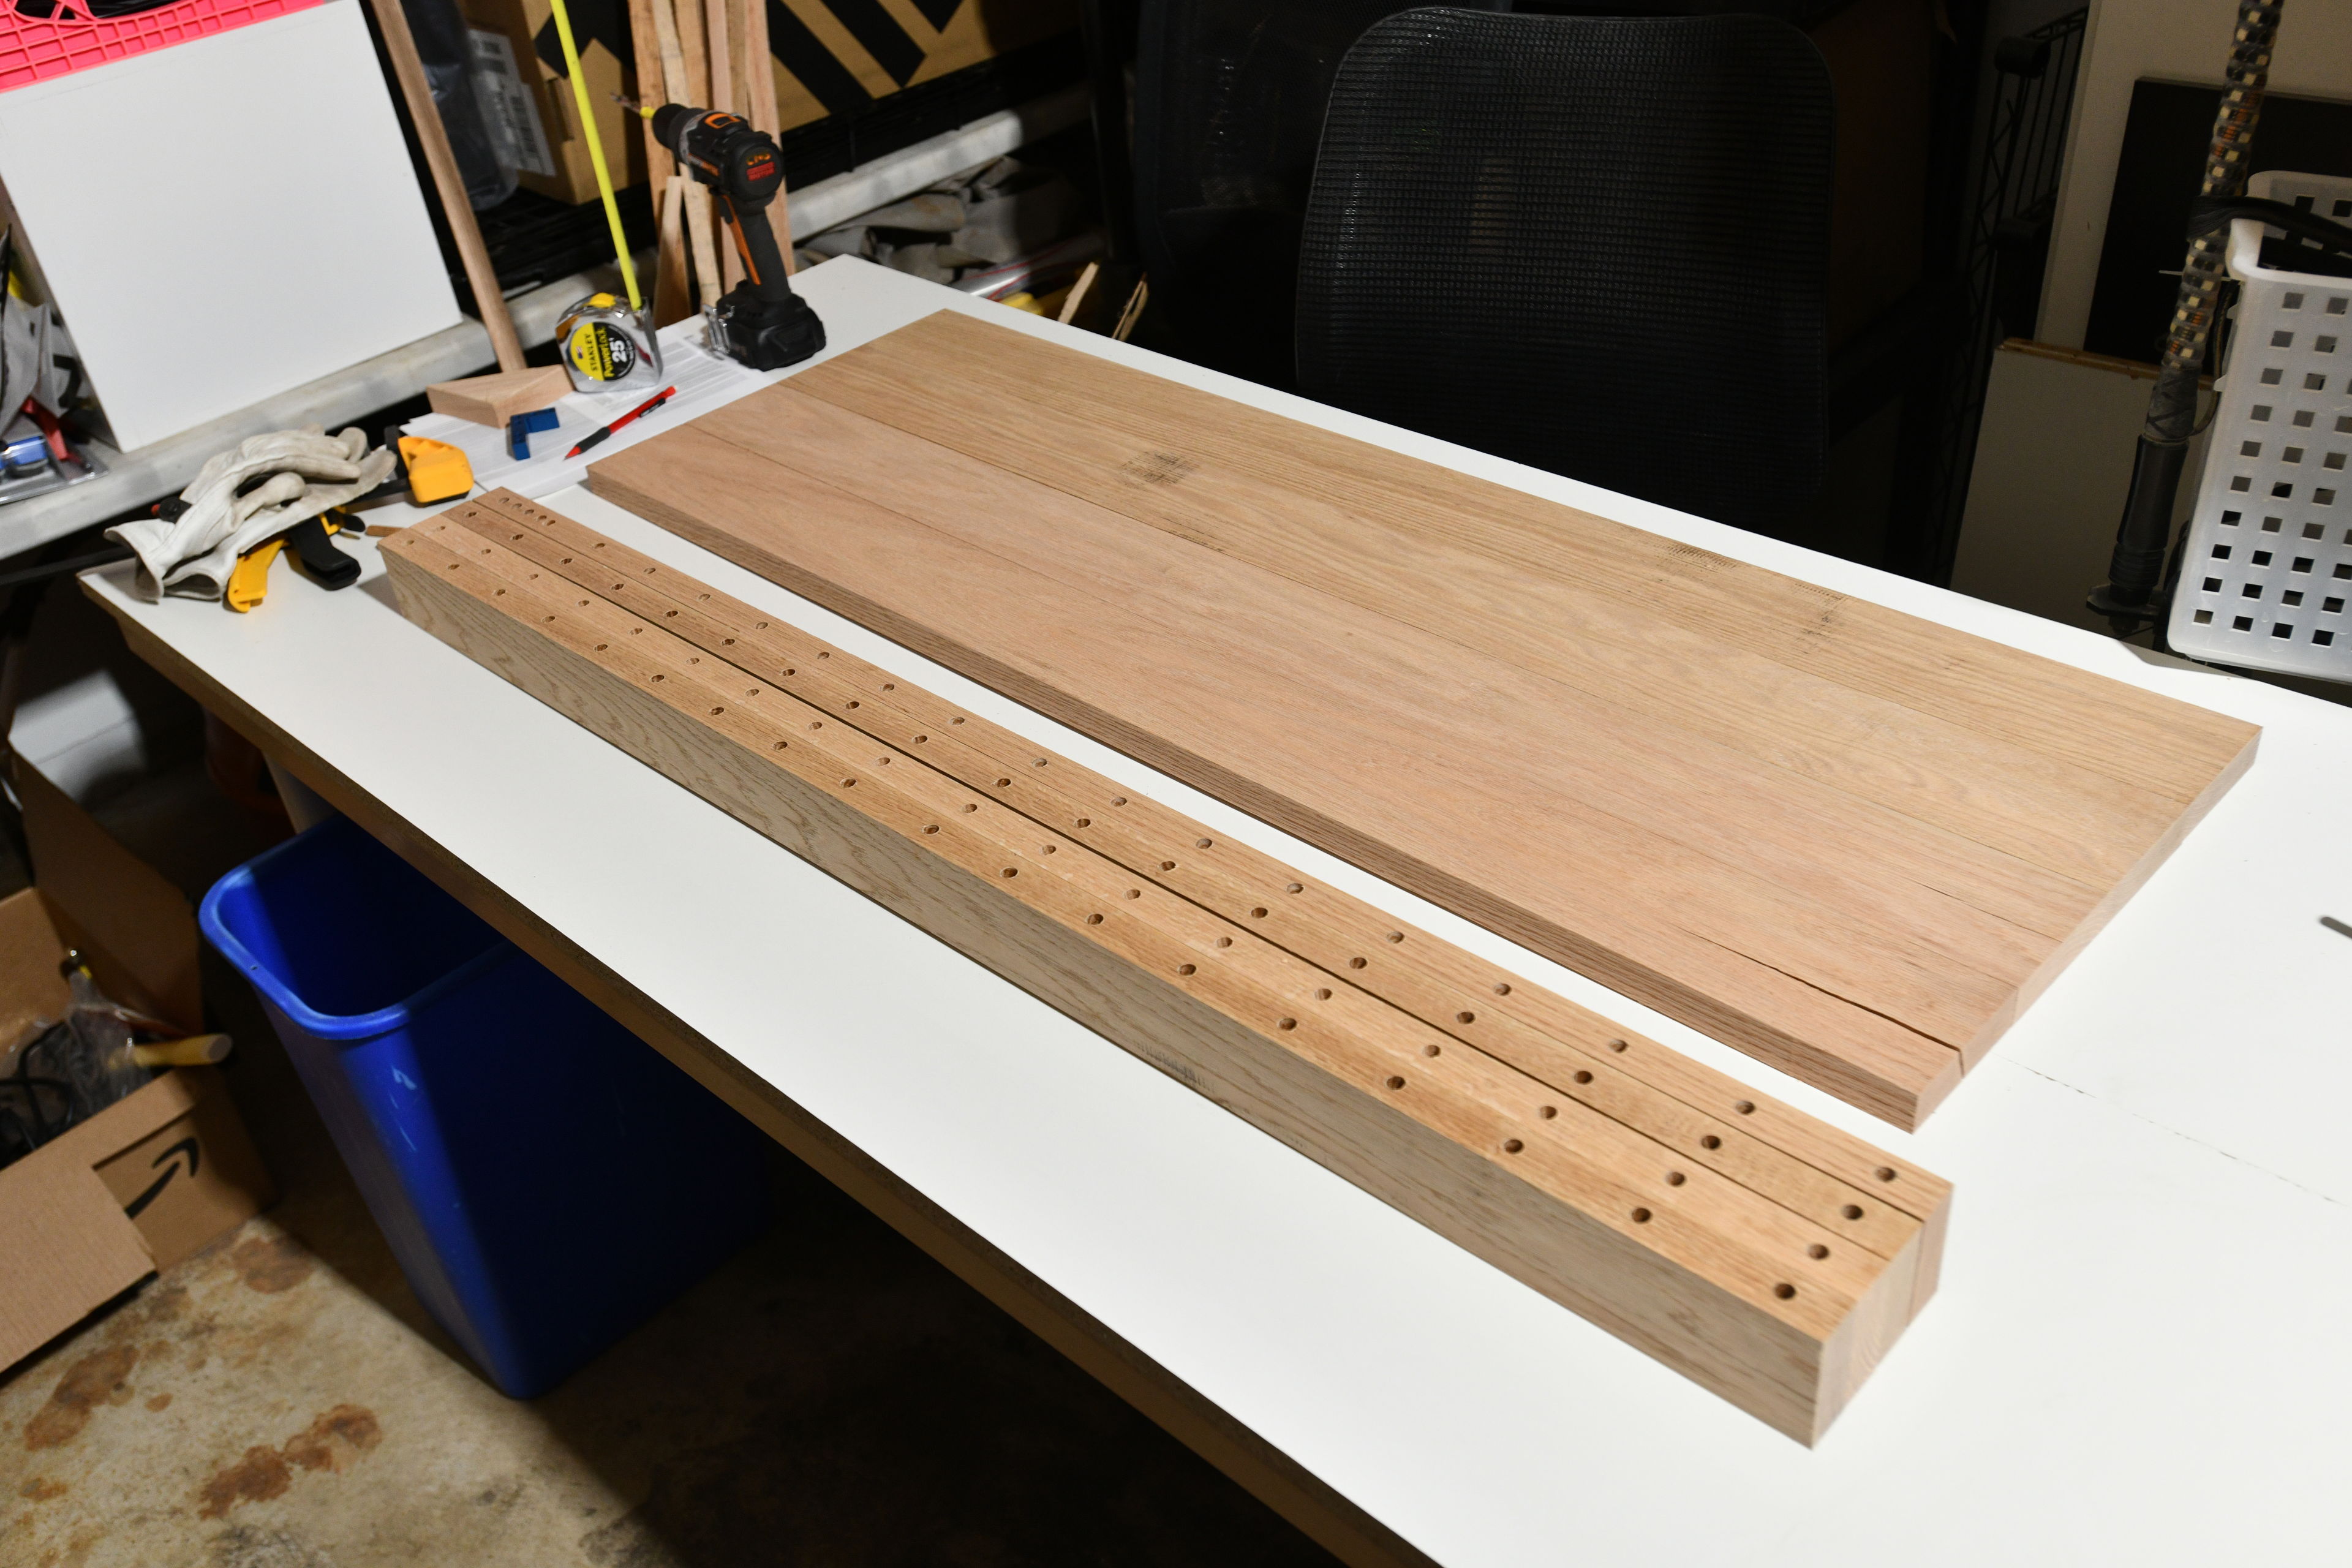 I switched from my original idea of using 4 inch square posts as legs to using two boards joined at a right angle. I decided to use dowels and glue to join these. It was my first time cutting dowel holes, and using a doweling jig.